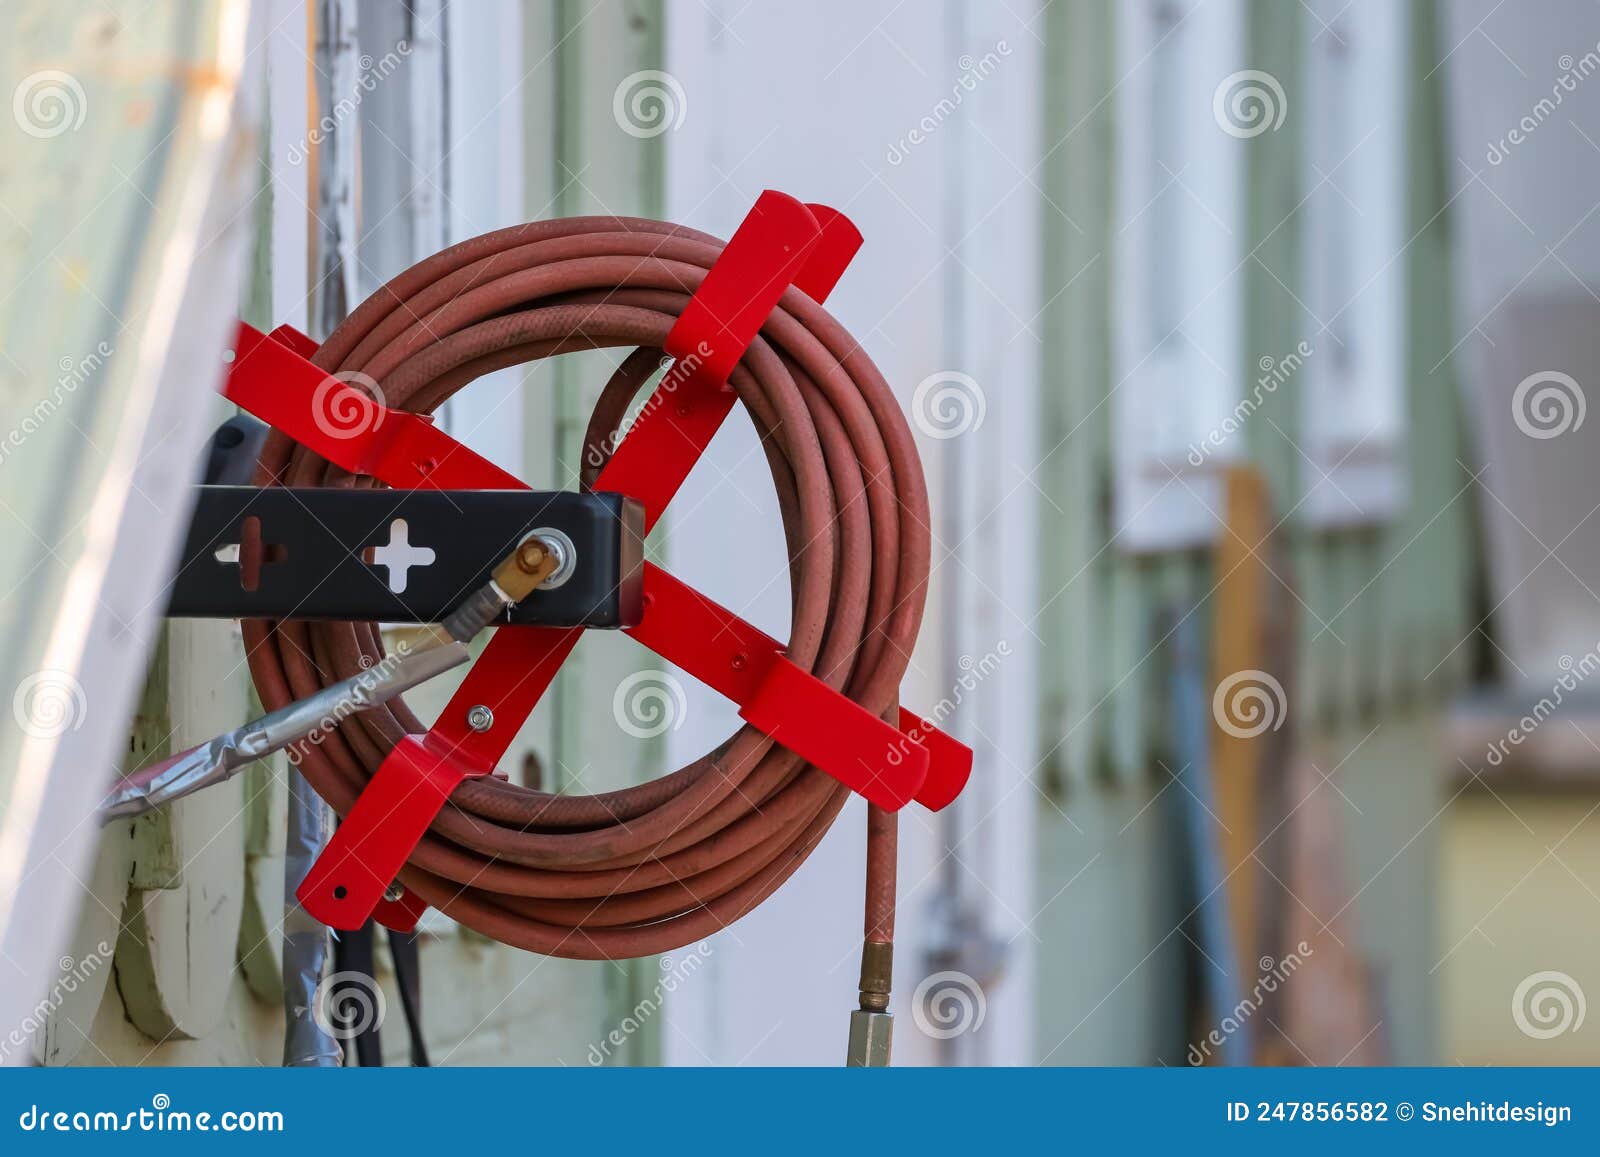 Air Compressor Hose Holder on the Wall Stock Photo - Image of pump